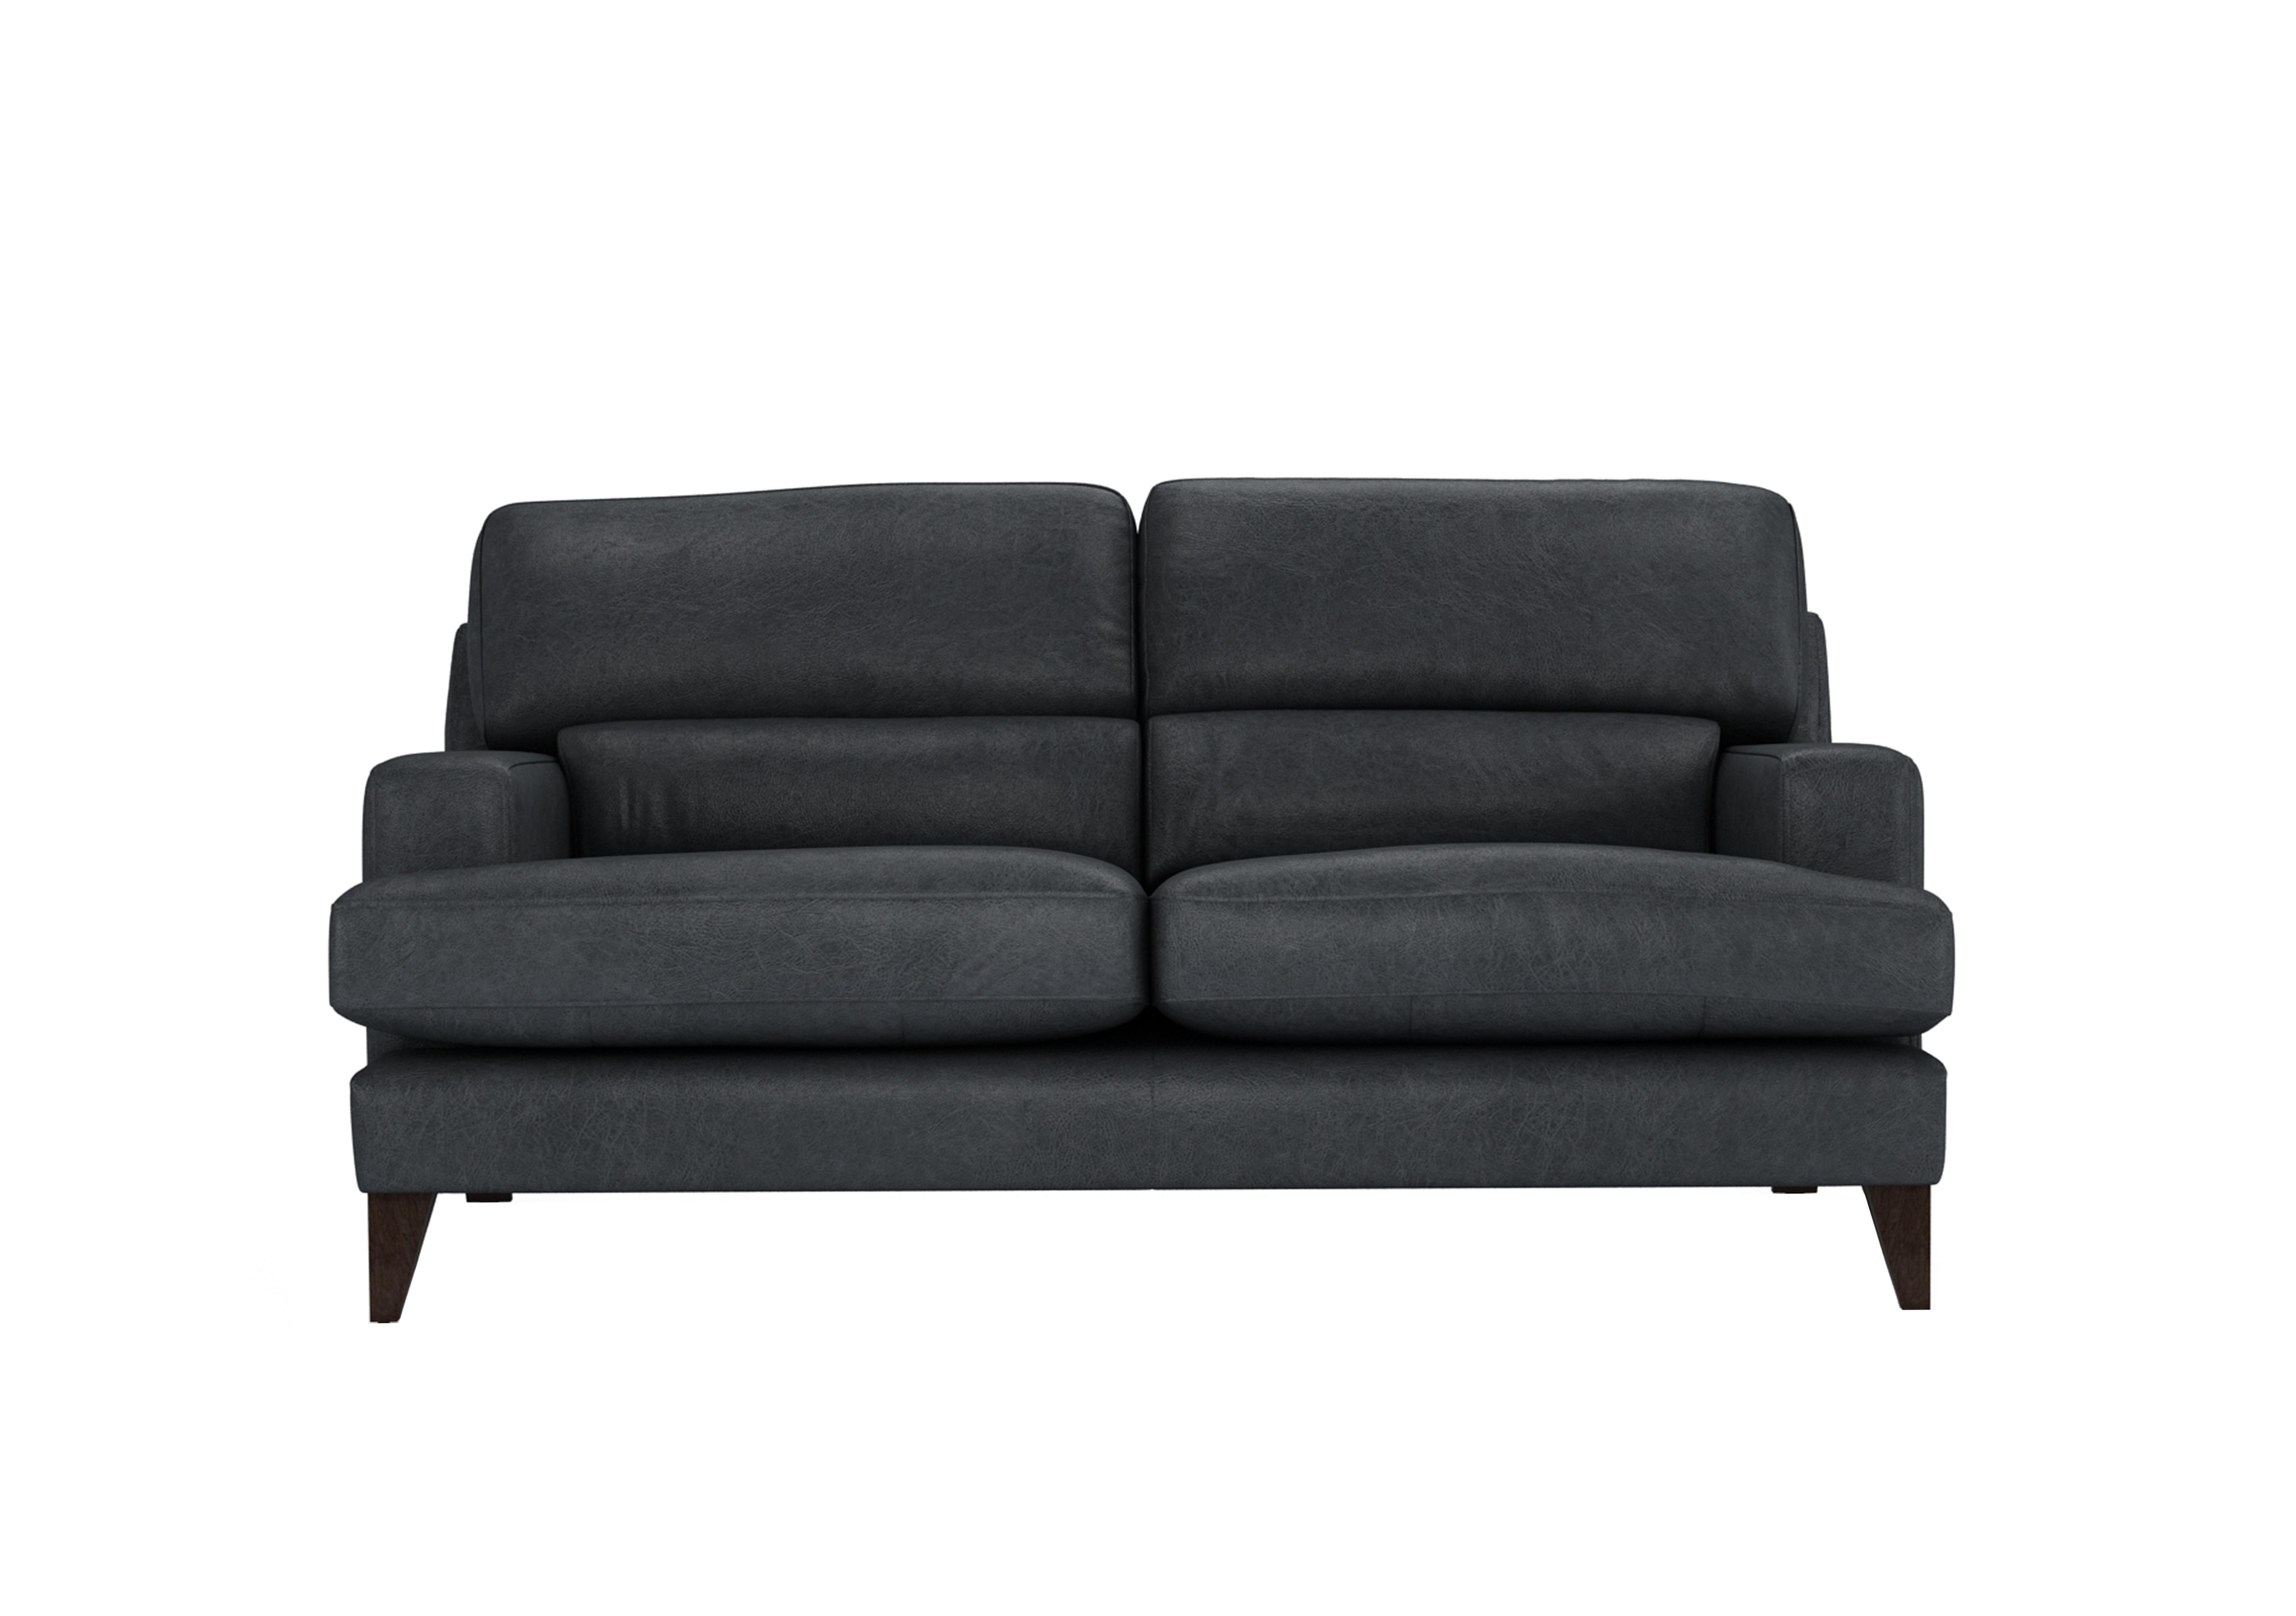 Romilly 2.5 Seater Leather Sofa in Sha188 Shadow Wa Ft on Furniture Village